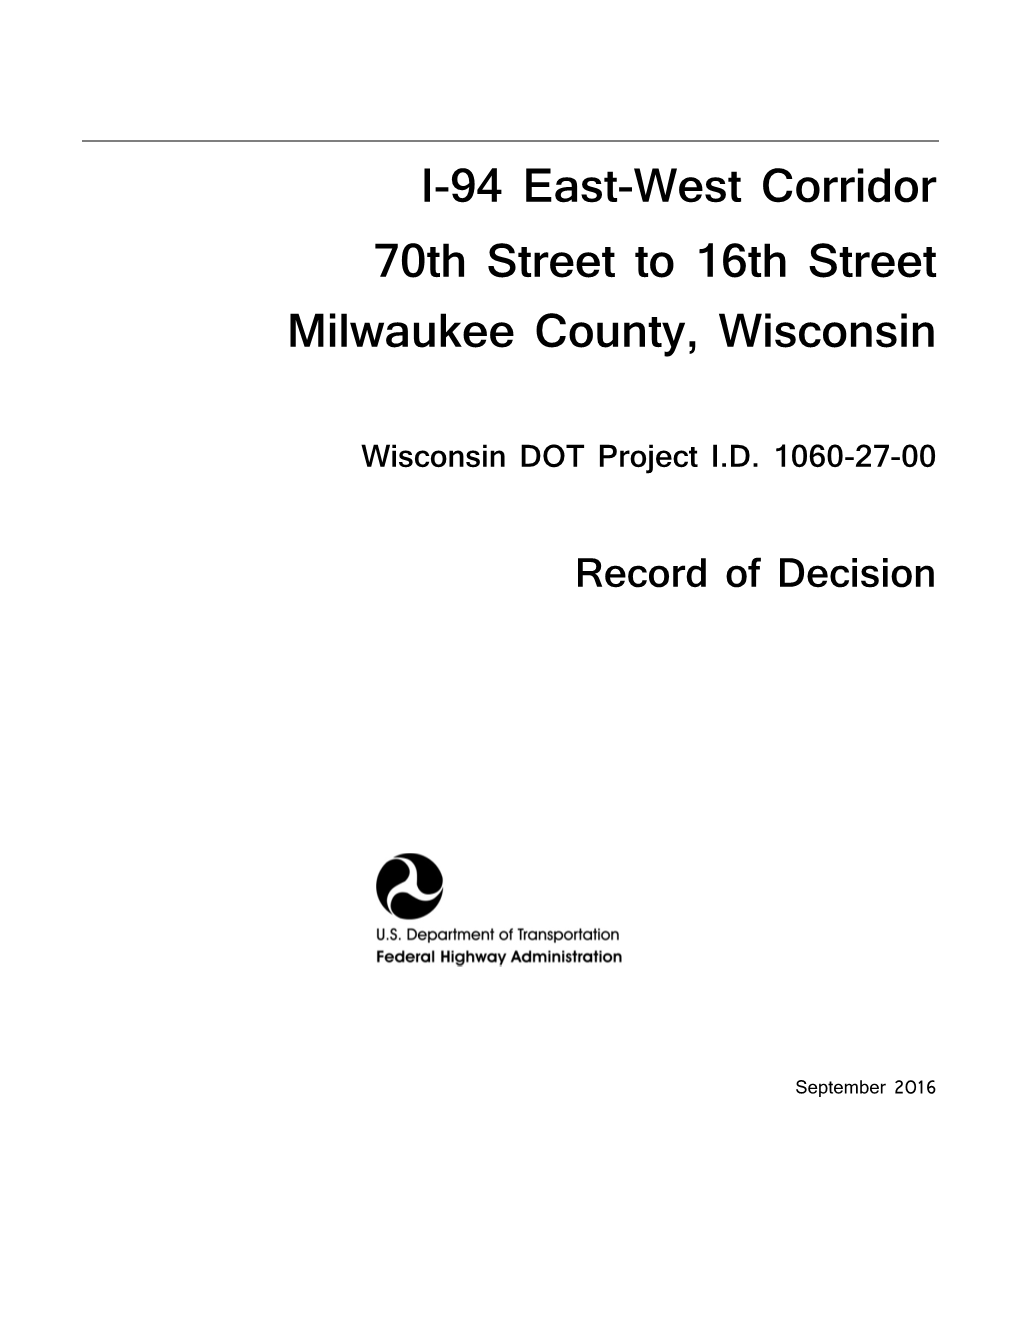 I-94 Eas/West Record of Decision